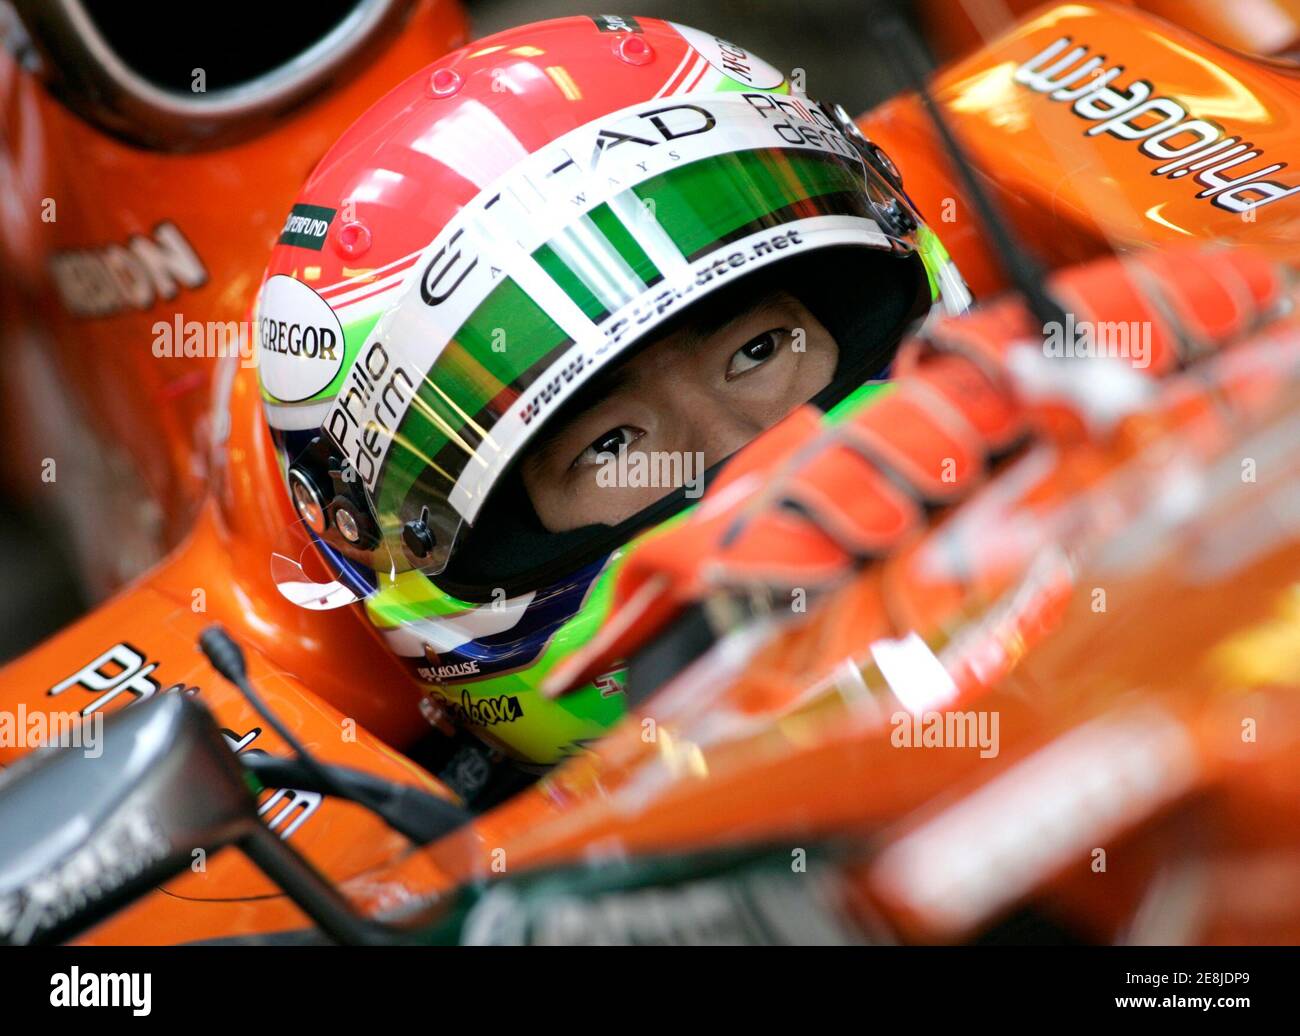 Spyker Formula One driver Sakon Yamamoto of Japan sits in his car in the pit during the first free practice for the Hungarian F1 Grand Prix in Budapest August 3, 2007. The Hungarian F1 Grand Prix will take place on Sunday, August 5.  REUTERS/Ivan Milutinovic (HUNGARY) Stock Photo